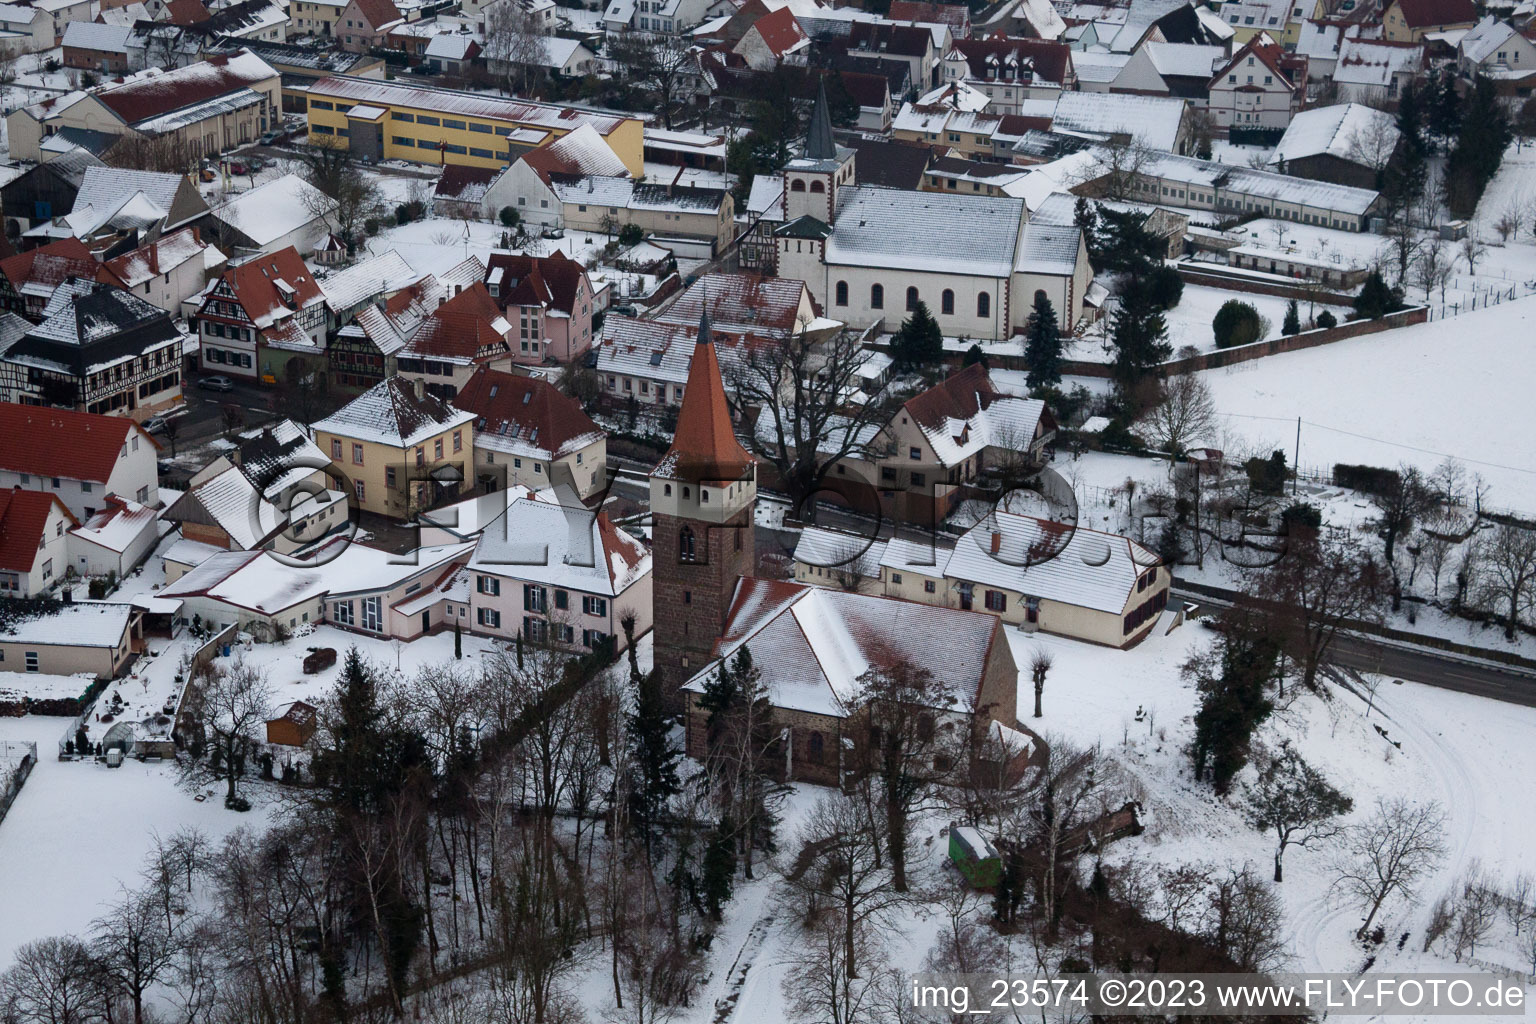 Minfeld in the state Rhineland-Palatinate, Germany from above